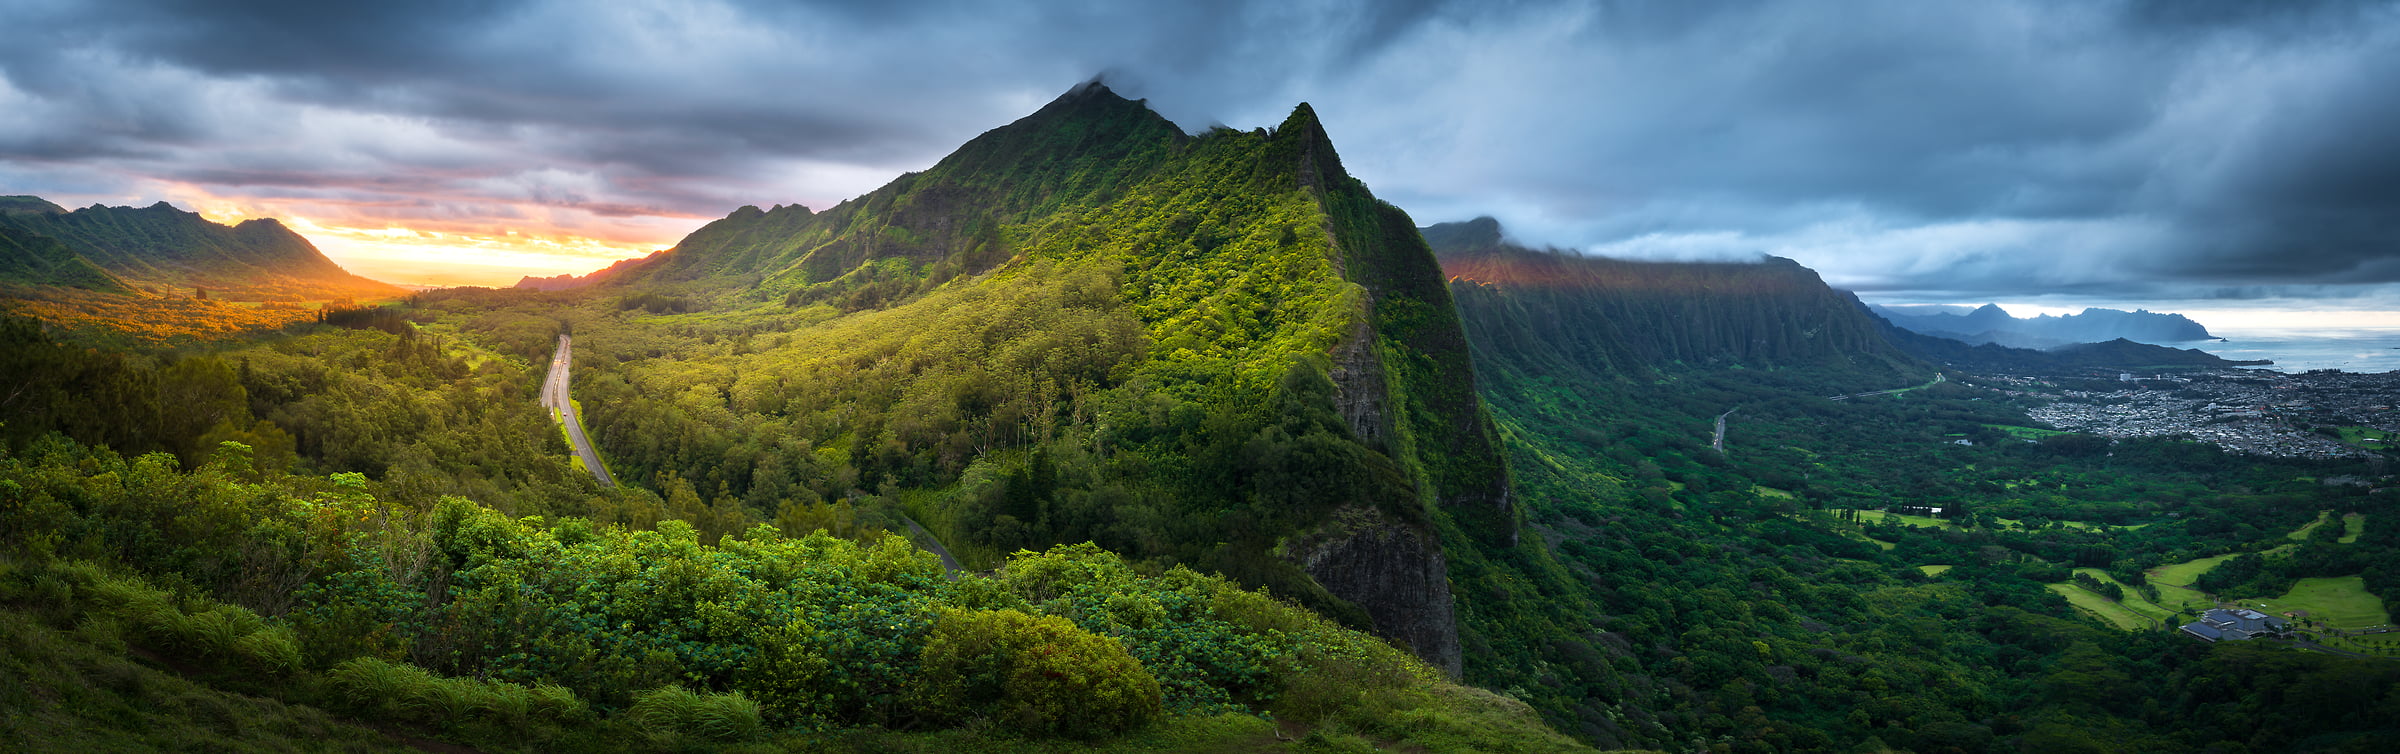 228 megapixels! A very high resolution, large-format VAST photo print of a landscape in Hawaii at sunset; photograph created by Jeff Lewis in Honolulu, Hawaii